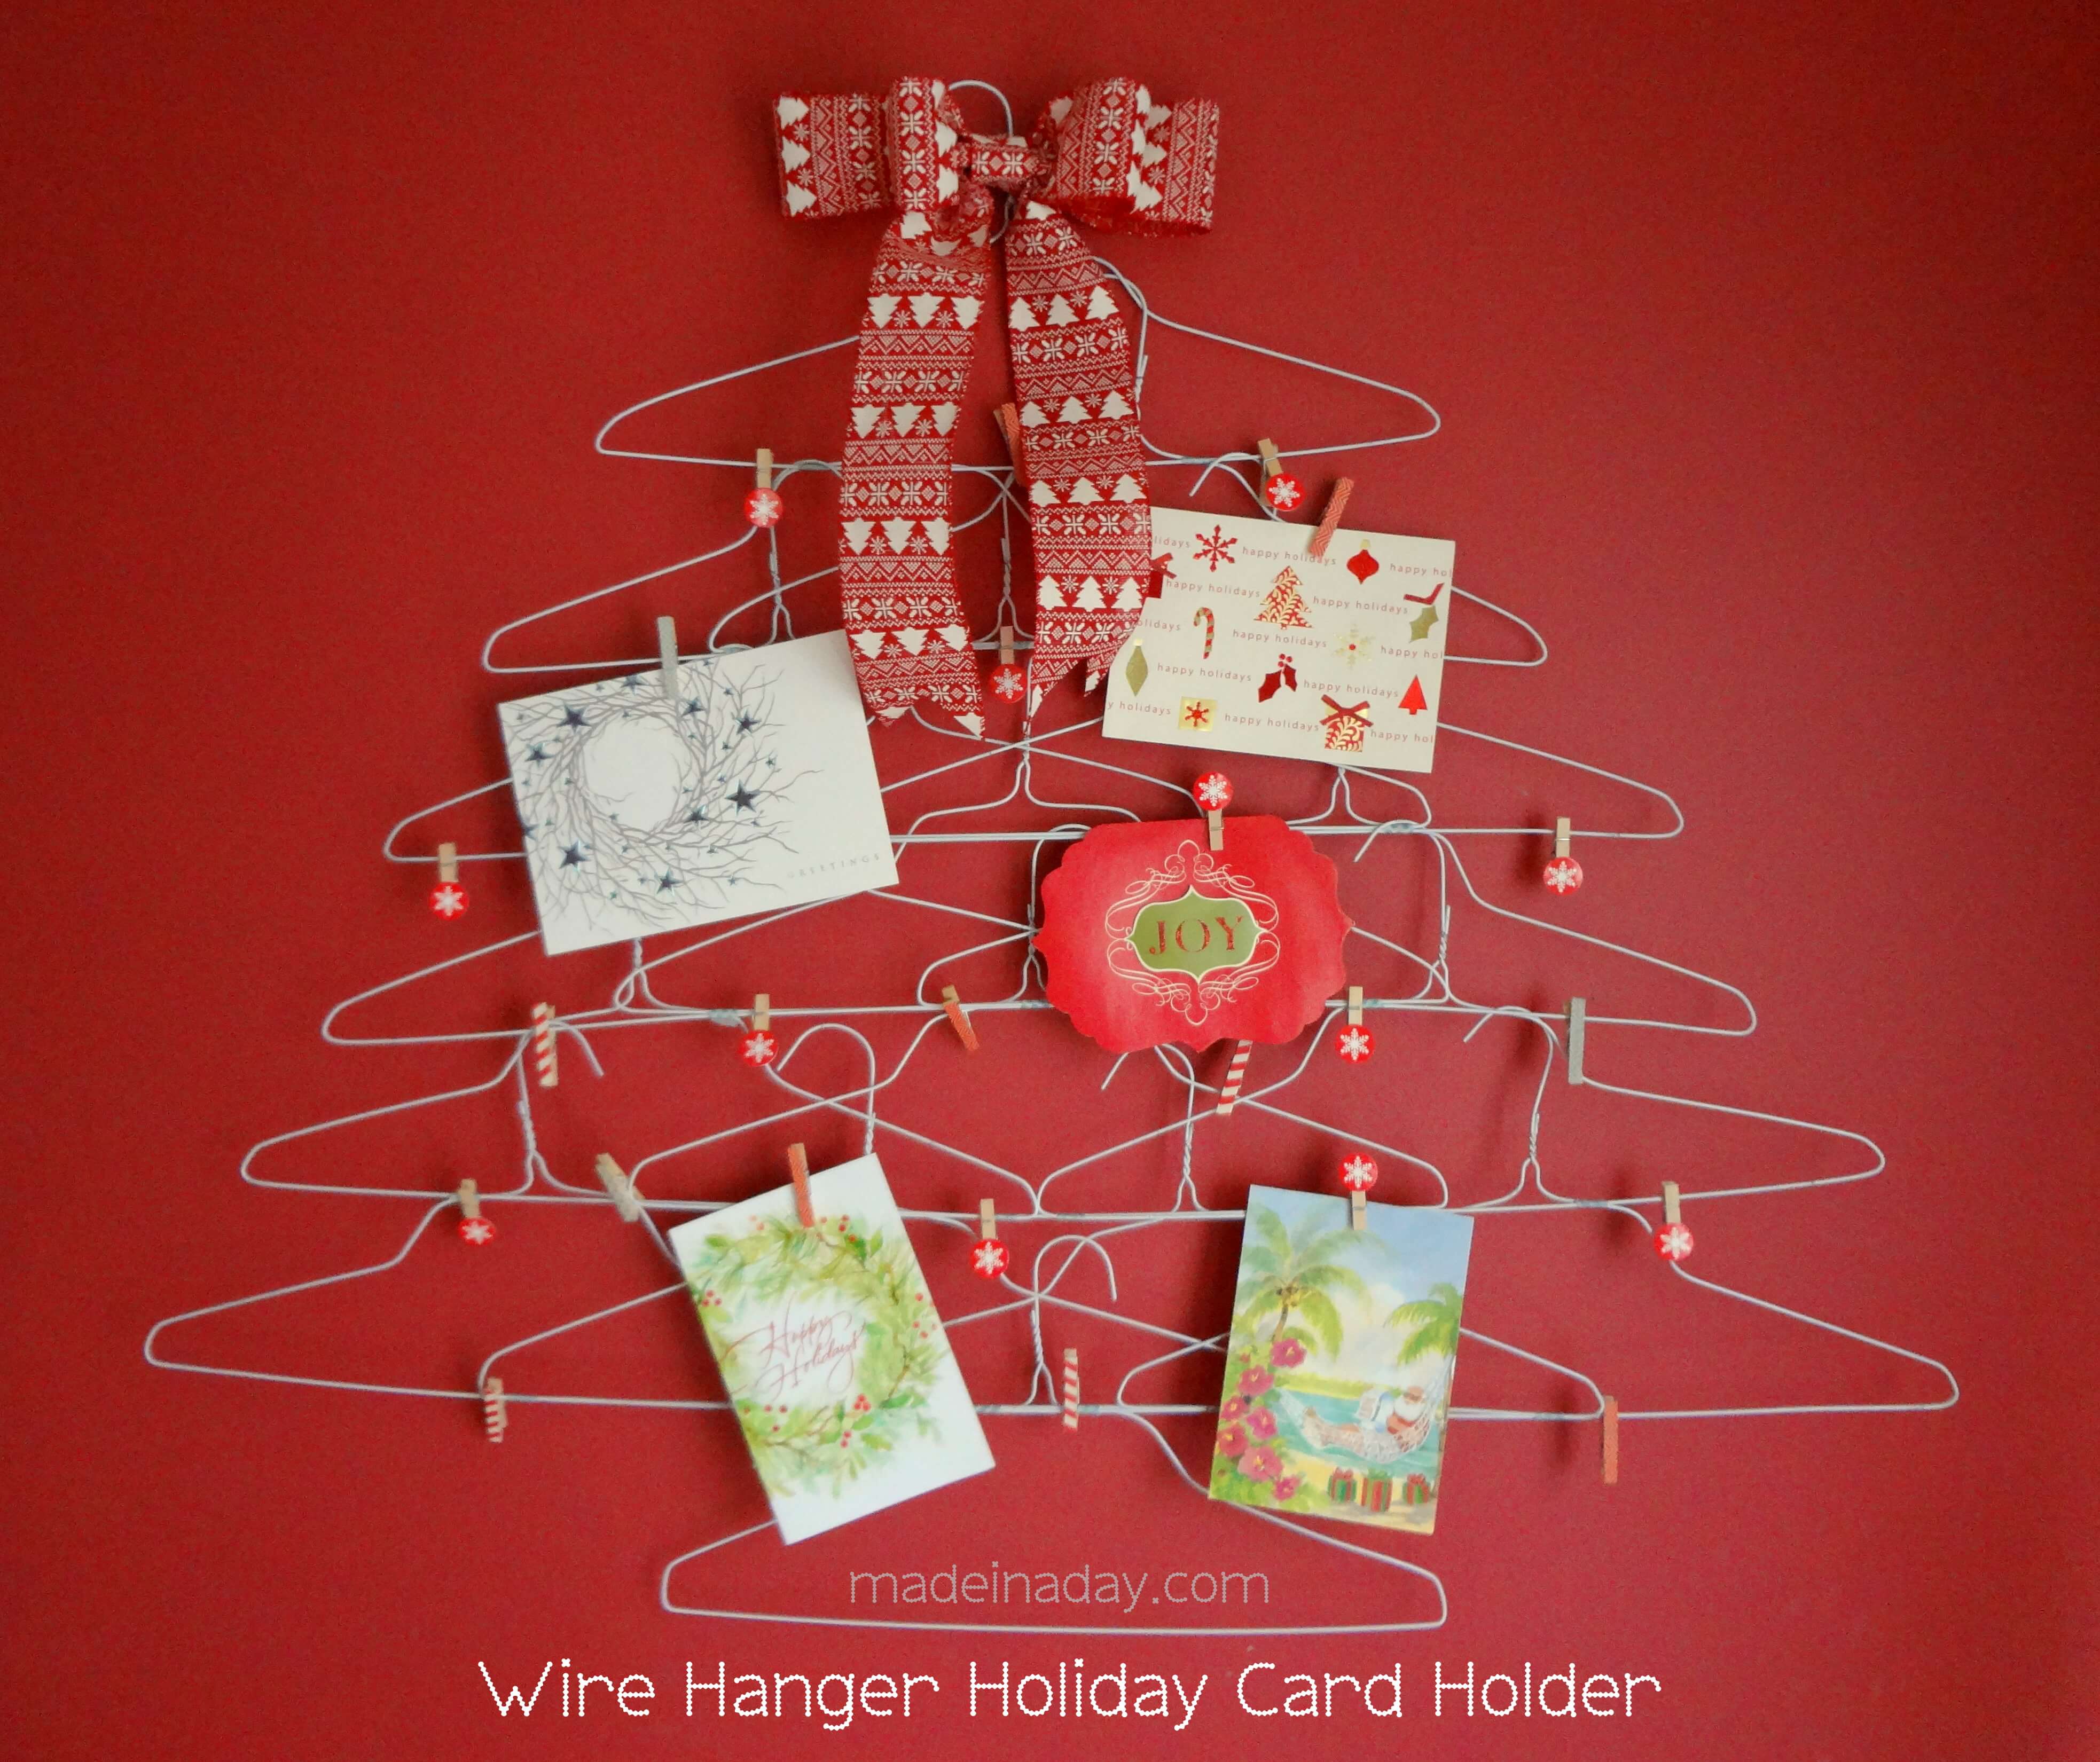 Wire Christmas tree holder for your cards